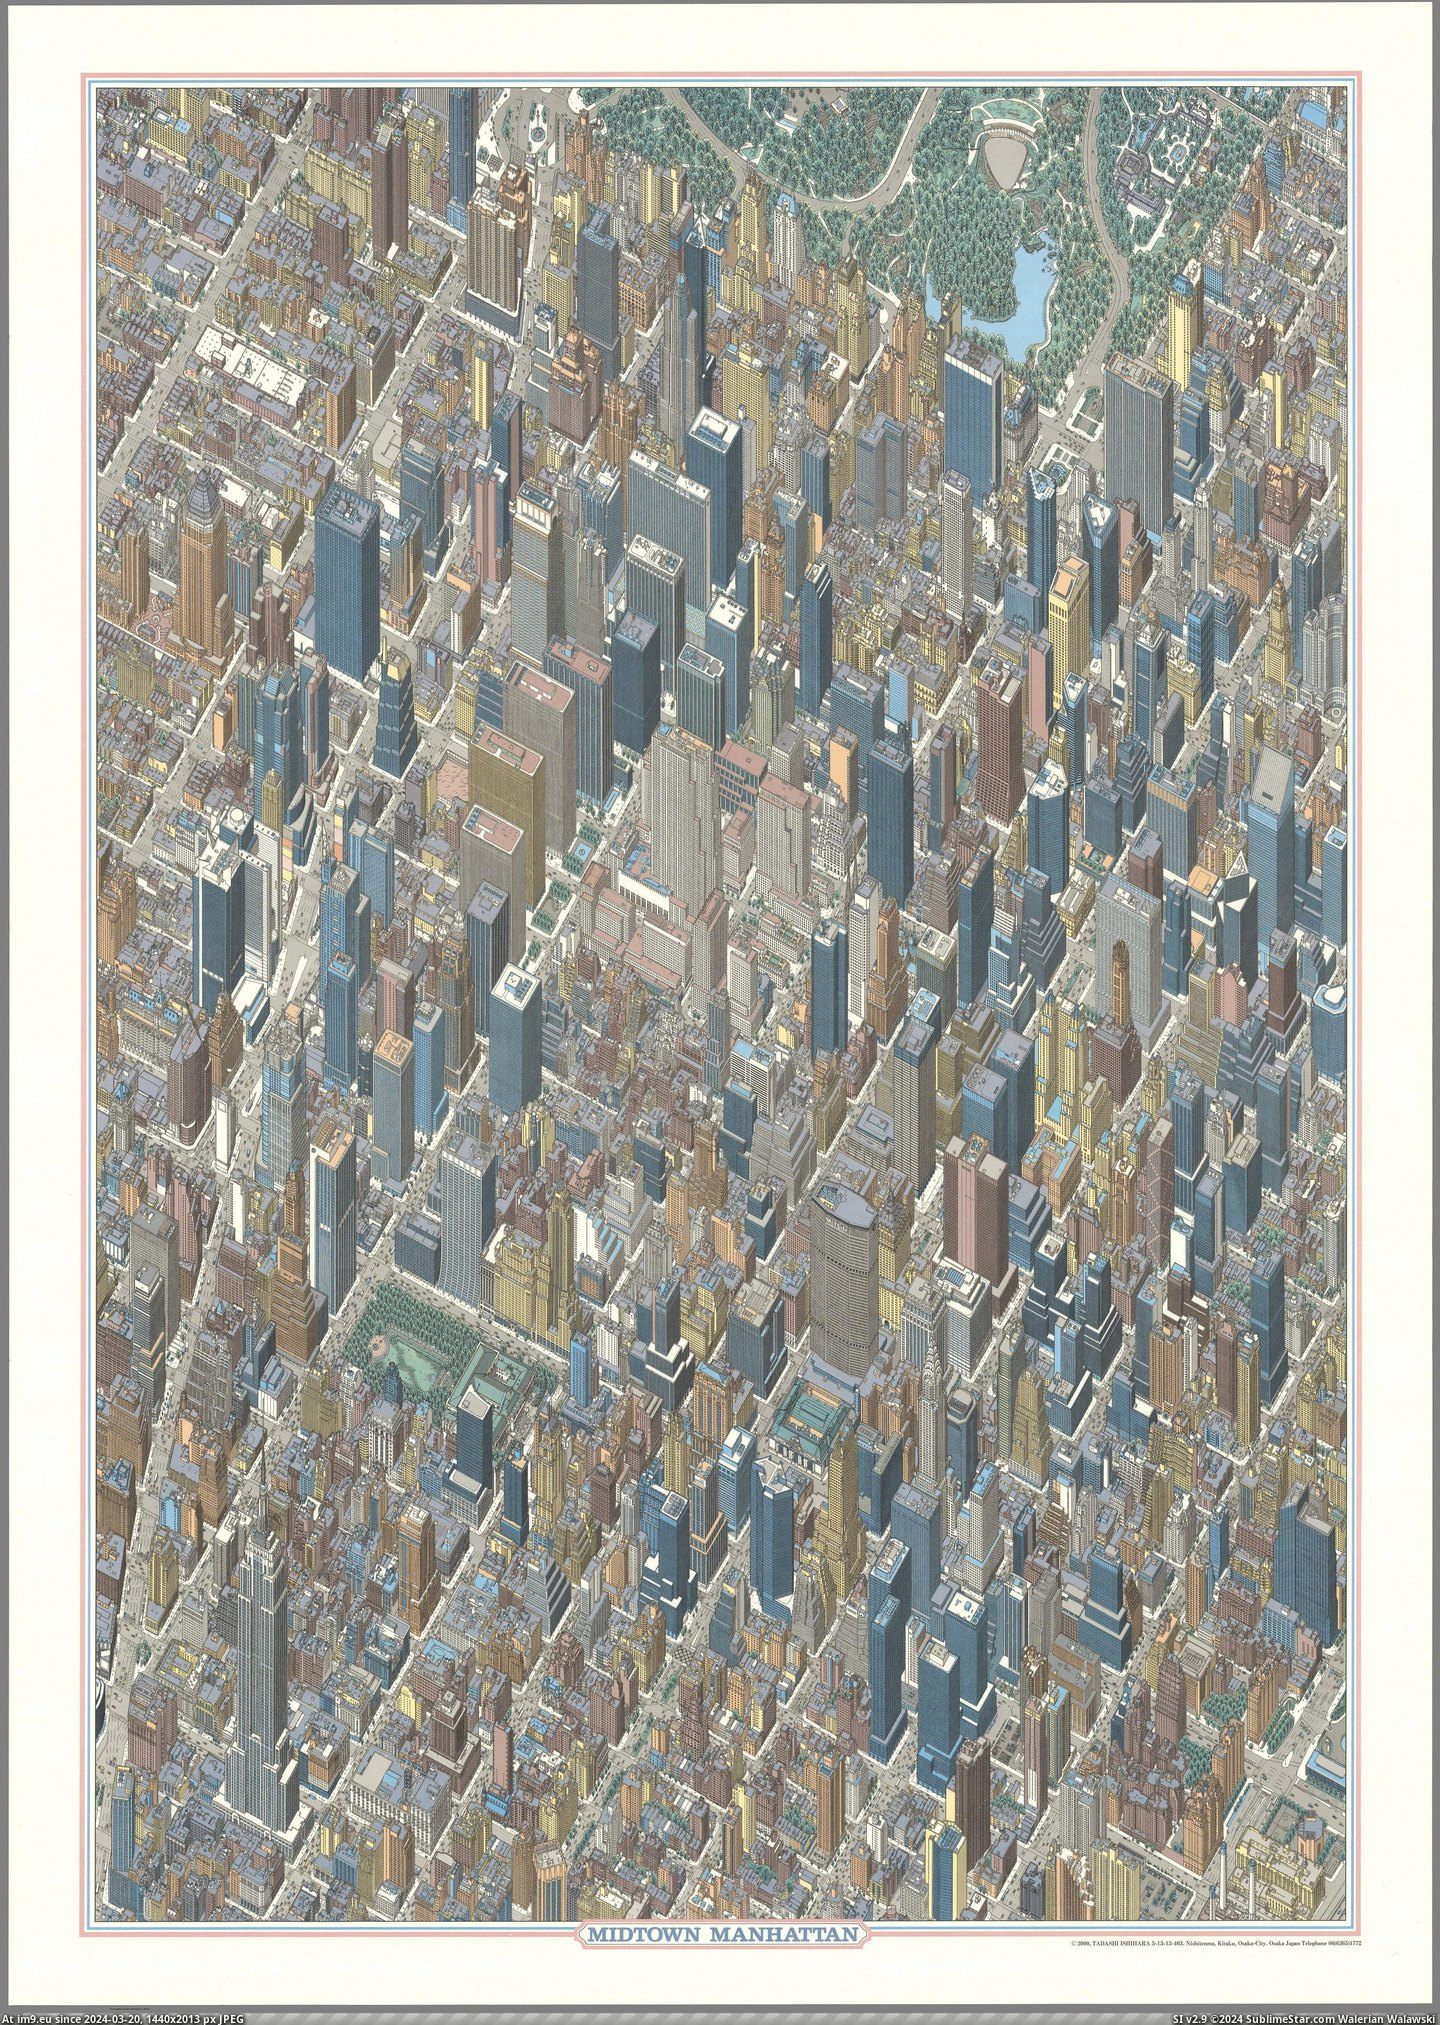 #Hentai #Nyc #Drawing #Papertowns #Tadashi #Manhattan #Midtown #Ishihara [Mapporn] Drawing of Midtown Manhattan, made by: Tadashi Ishihara (2000)[3028x4245] ( -r-papertowns and -r-nyc) Pic. (Image of album ))